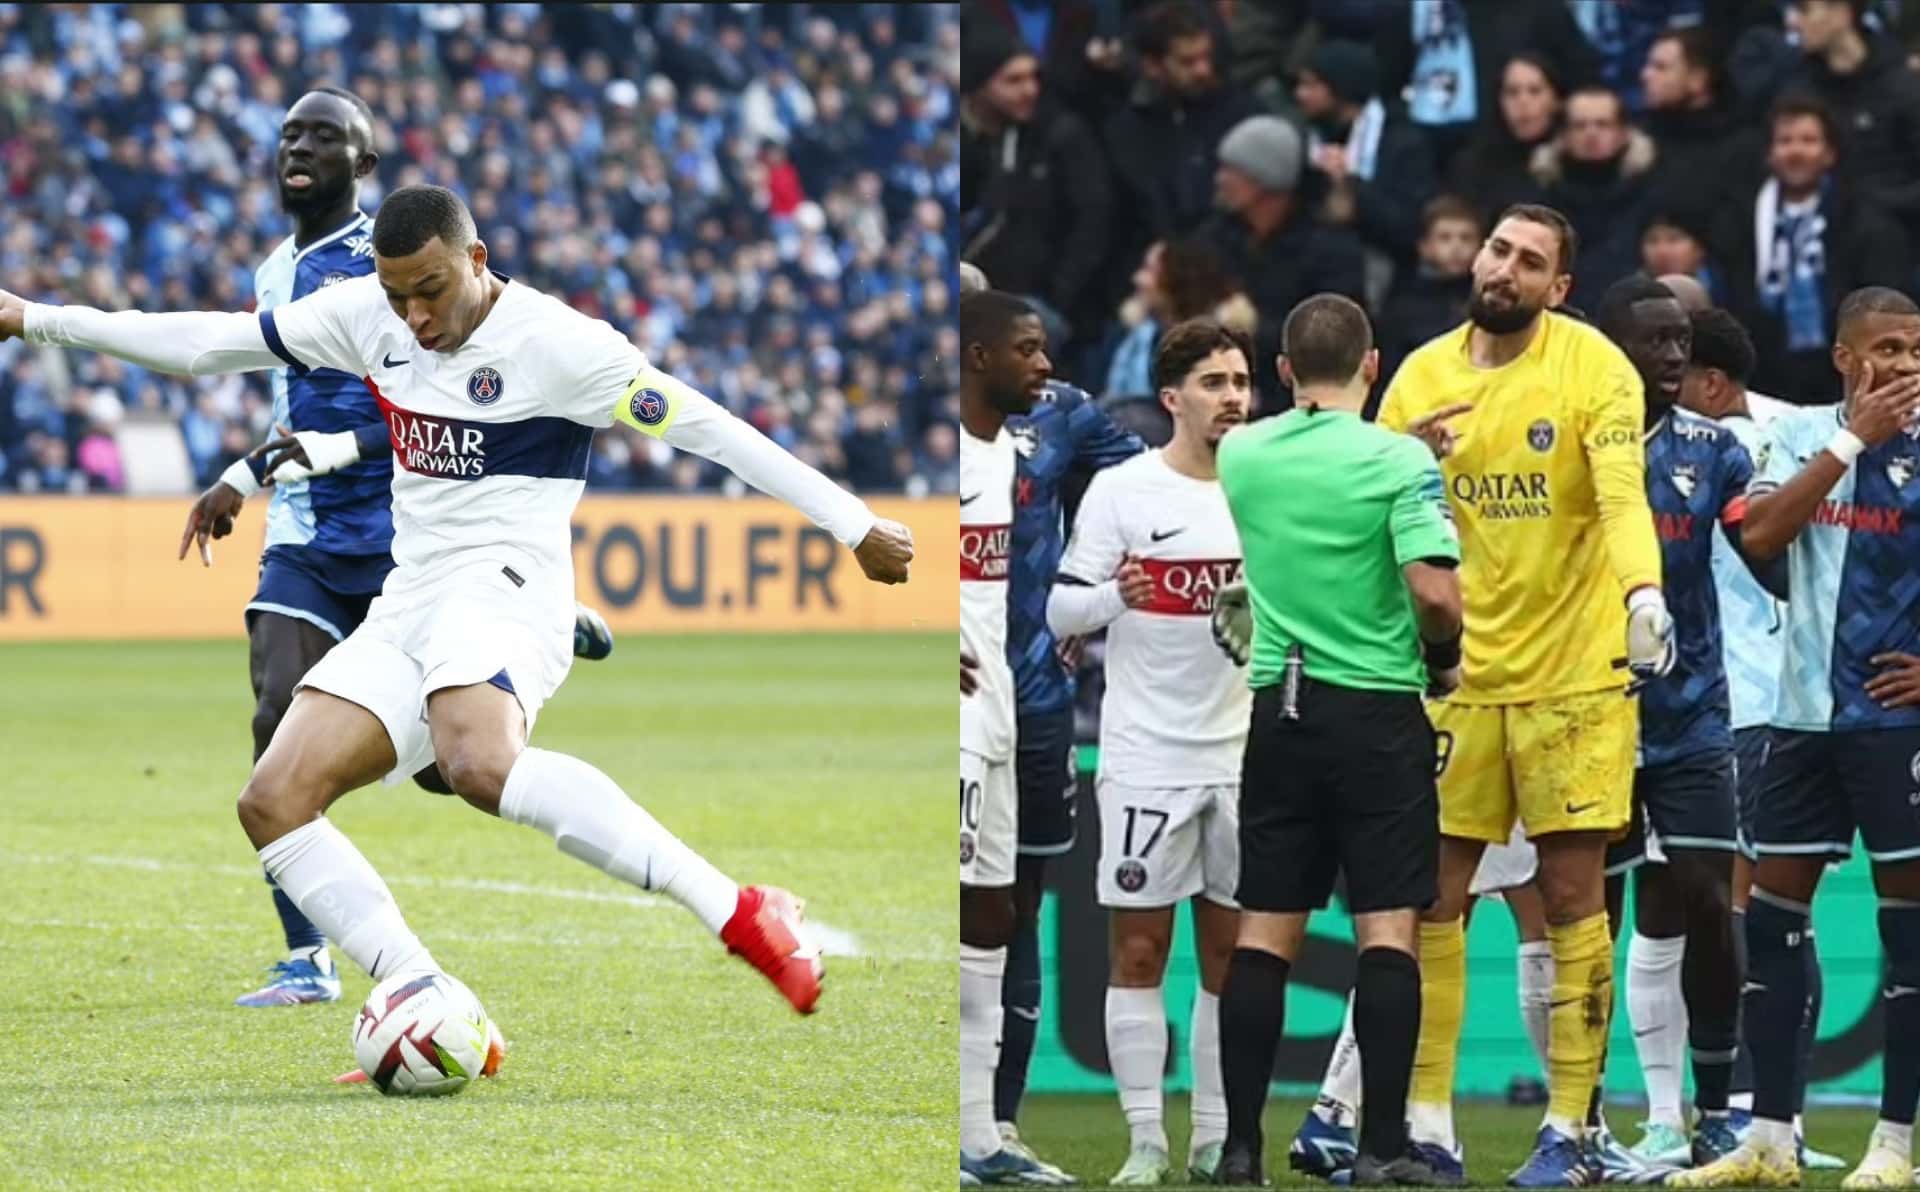 Ten men PSG players secure 2-0 victory over Le Havre after goalkeeper Donnarumma's red card